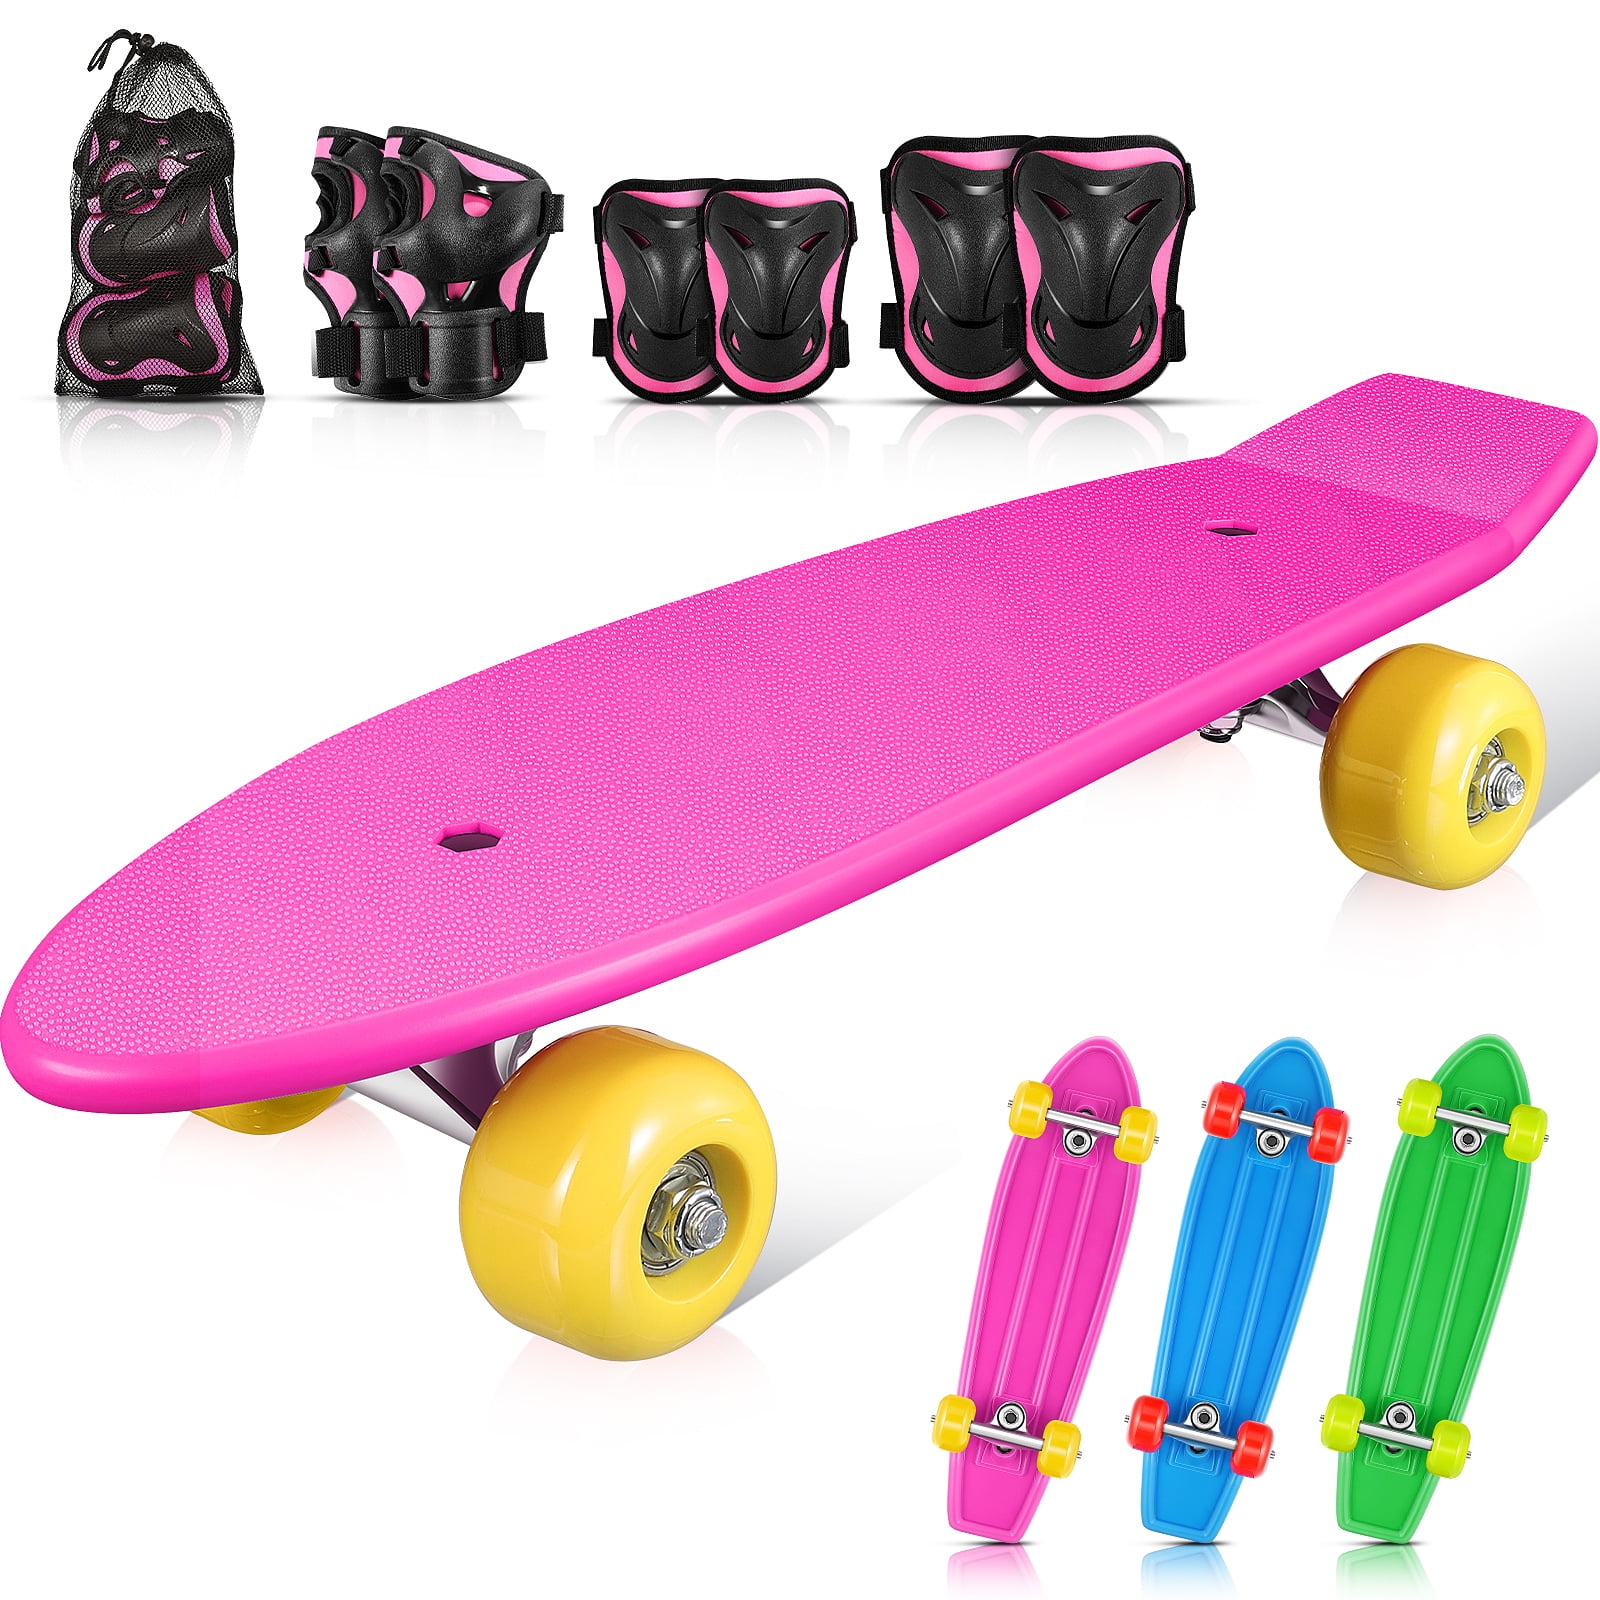 Details about   Complete Skate Boards Skateboard LED Wheels for Beginners Teens Girls THP 